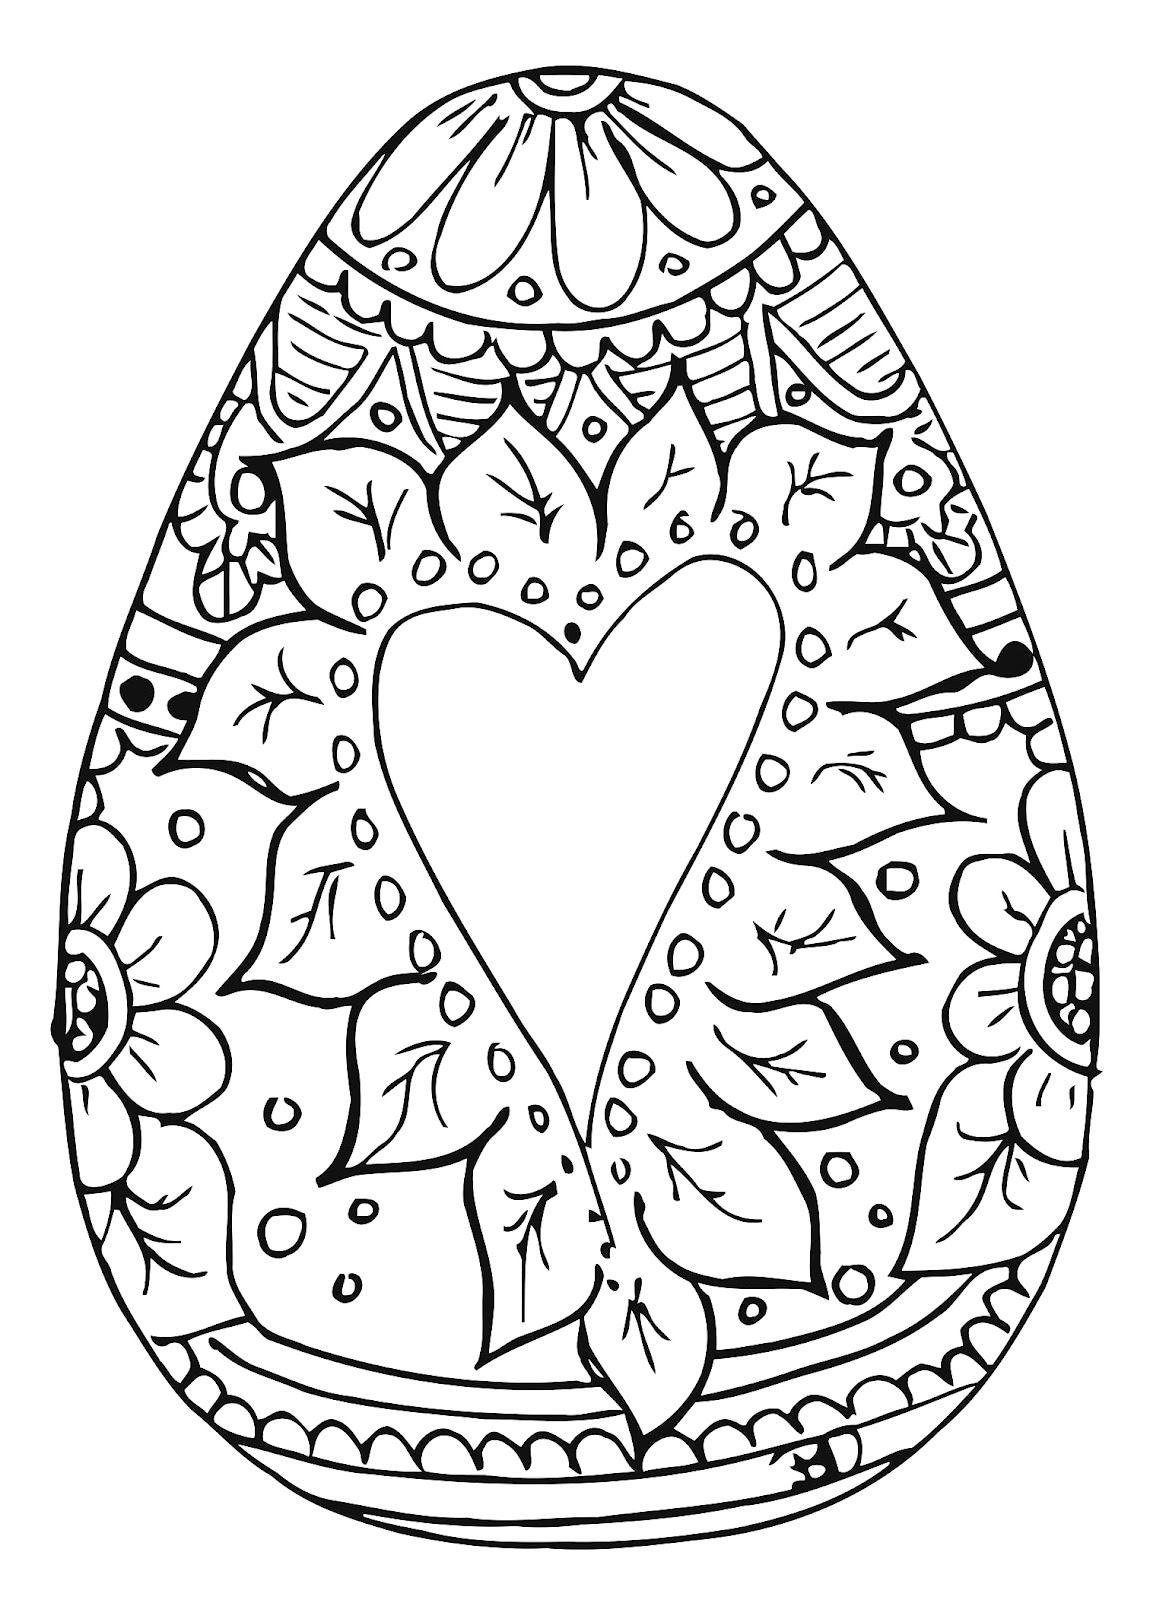 Easter Egg With Heart For Adult Coloring Pages   Coloring Cool